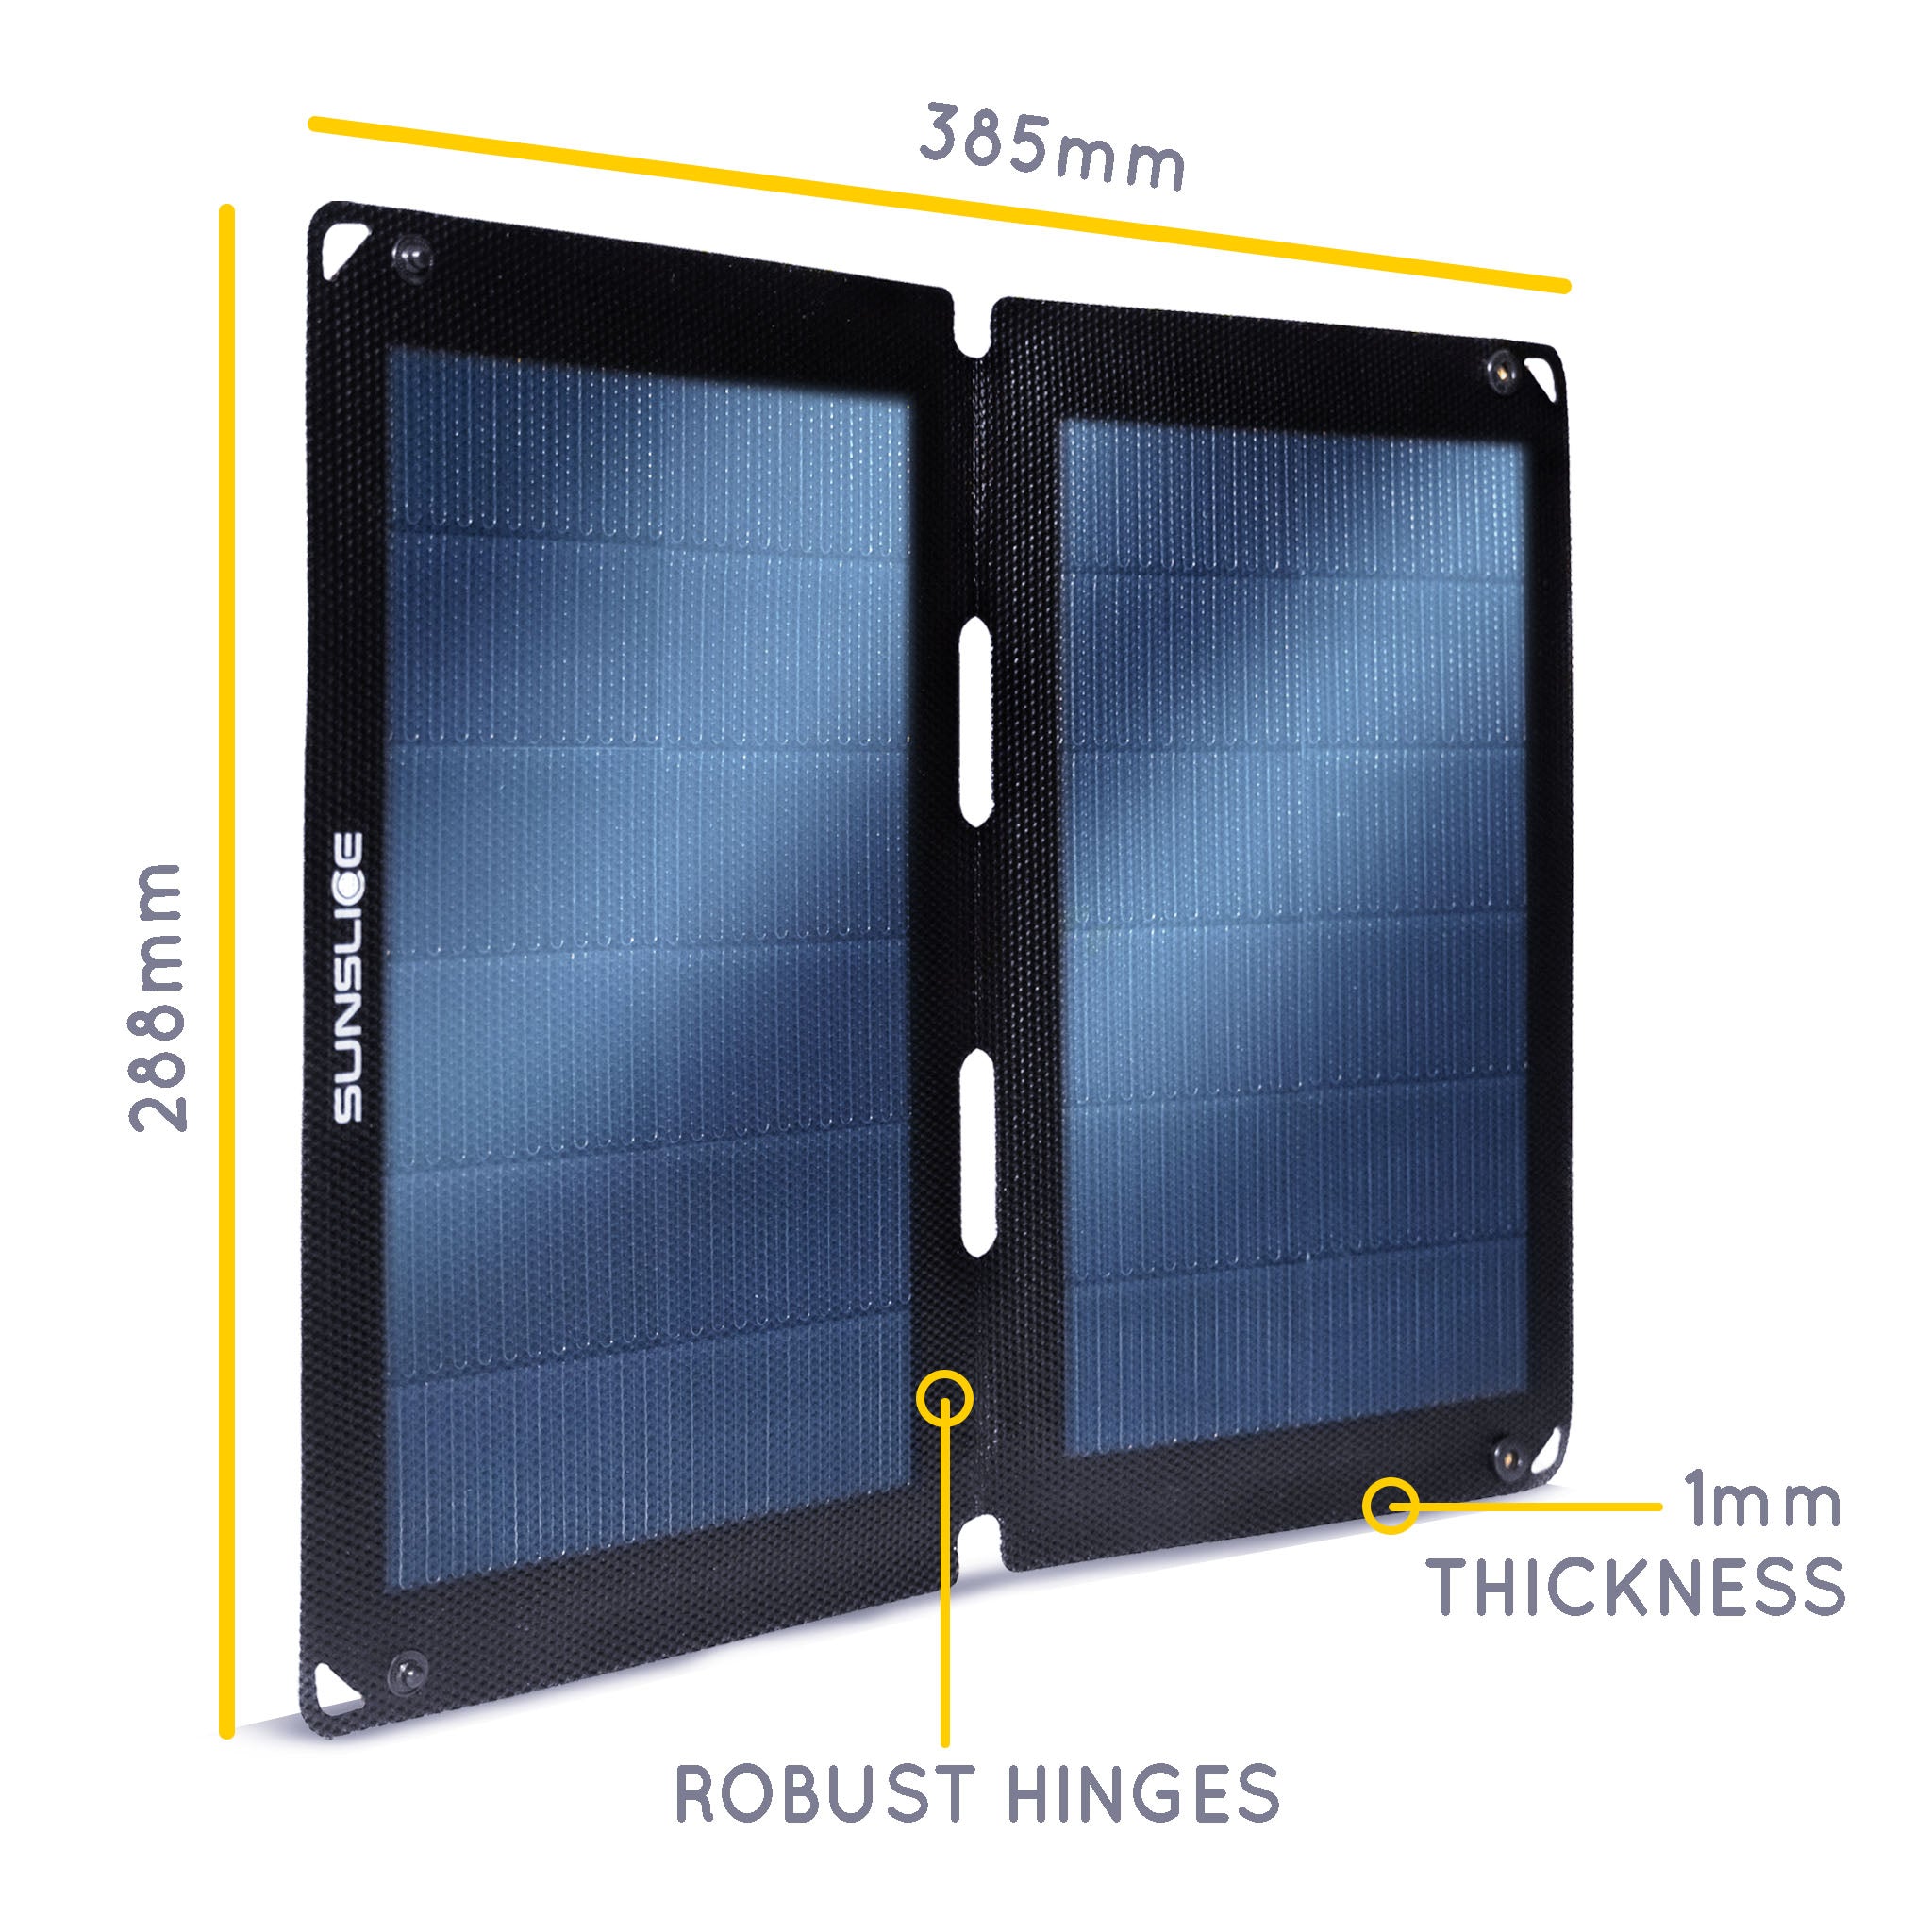 Solar panel Informations. Size : 385mm, 288 mm, thickness 1mm. Robust Hinges